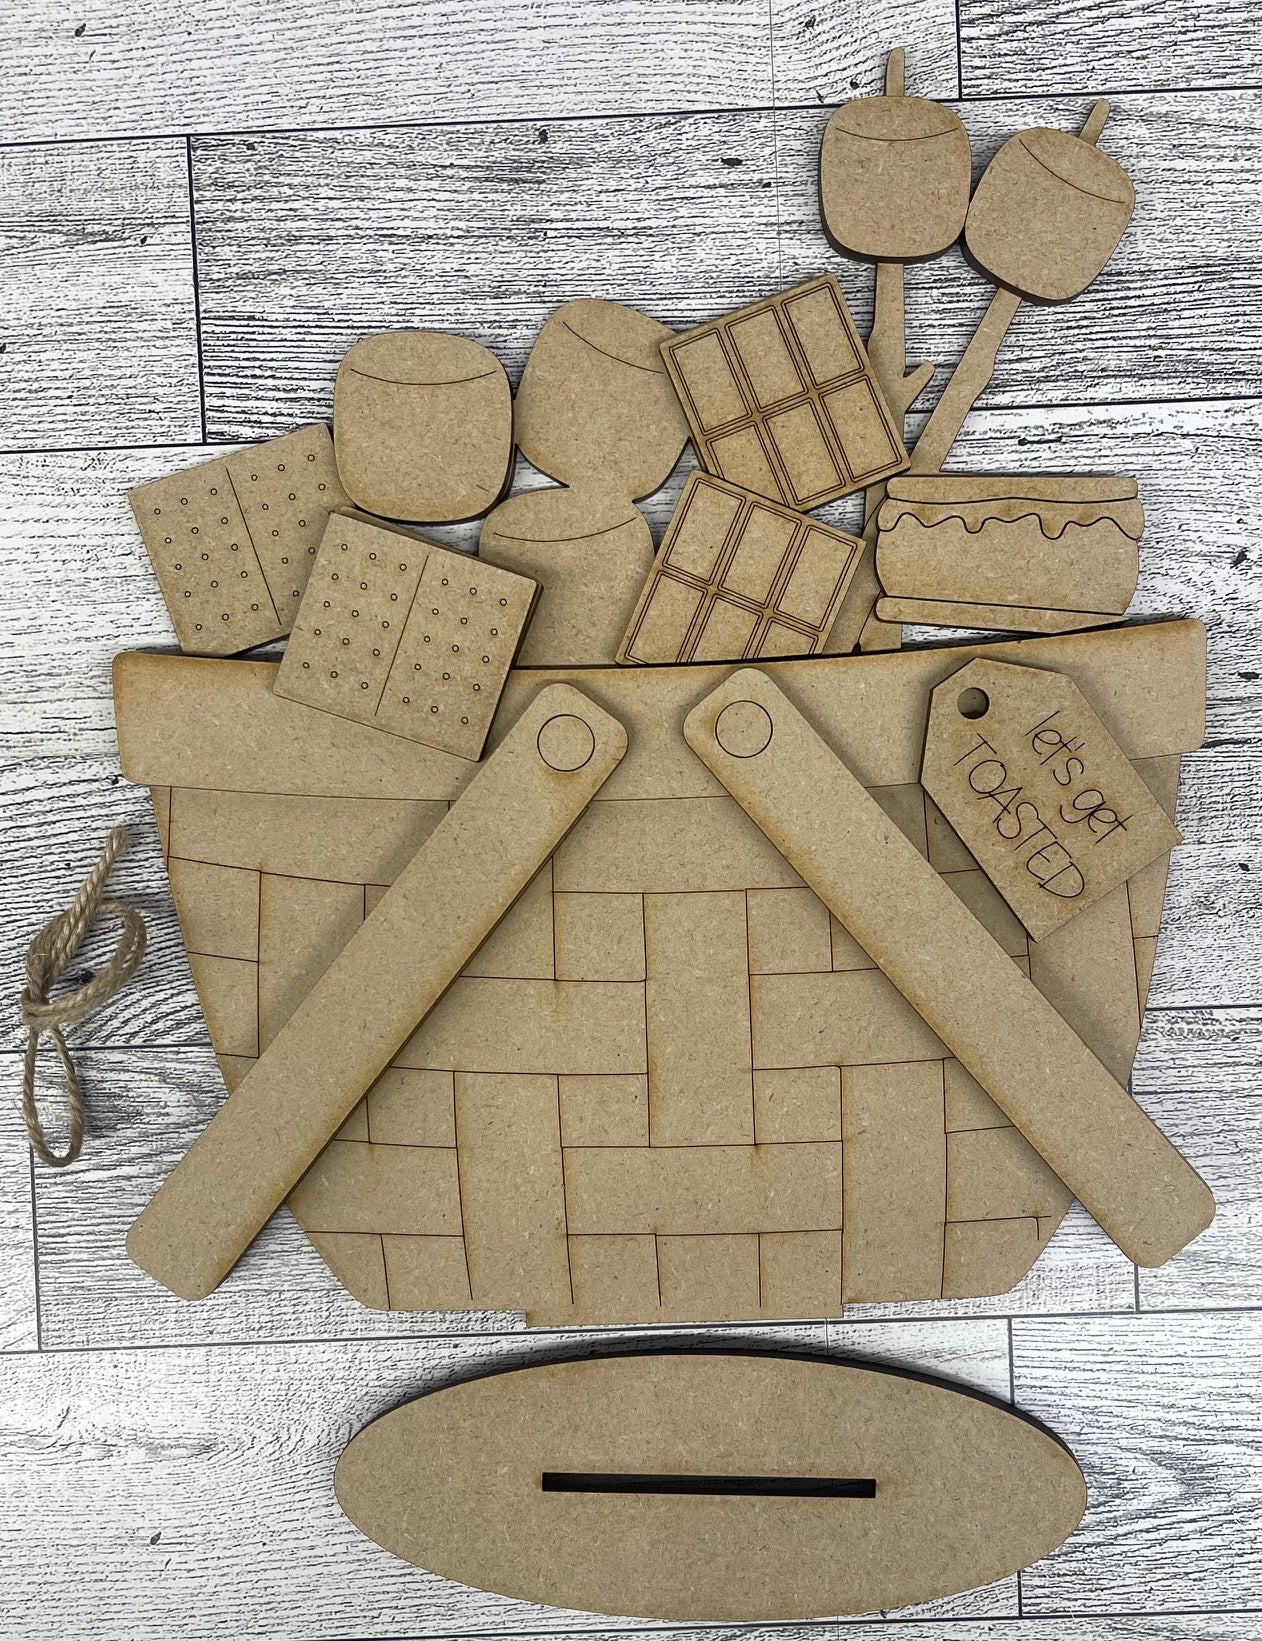 Smore Insert only or with basket - unpainted wooden cutouts, ready for you to paint